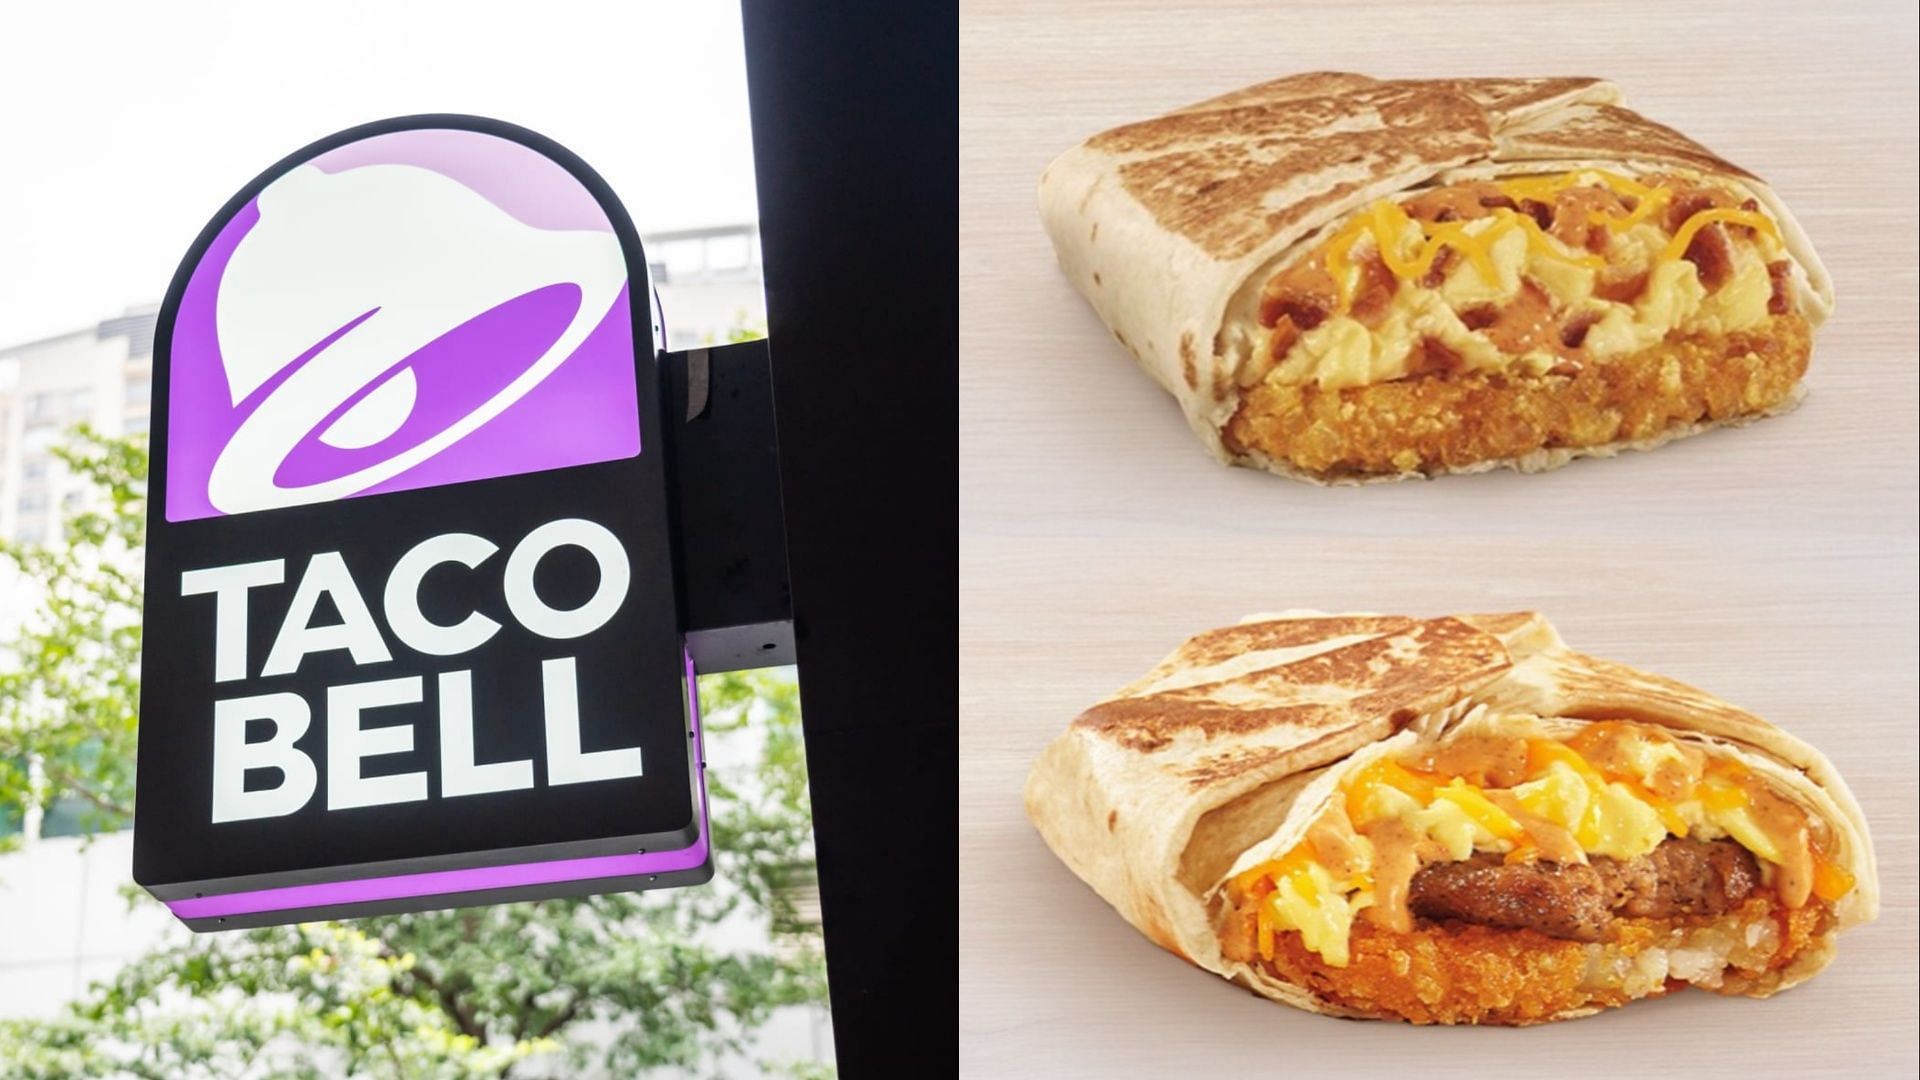 Taco Bell is offering free Breakfast Crunchwraps every Tuesday throughout June (Image via Alex Tai/Getty Images/ Taco Bell)